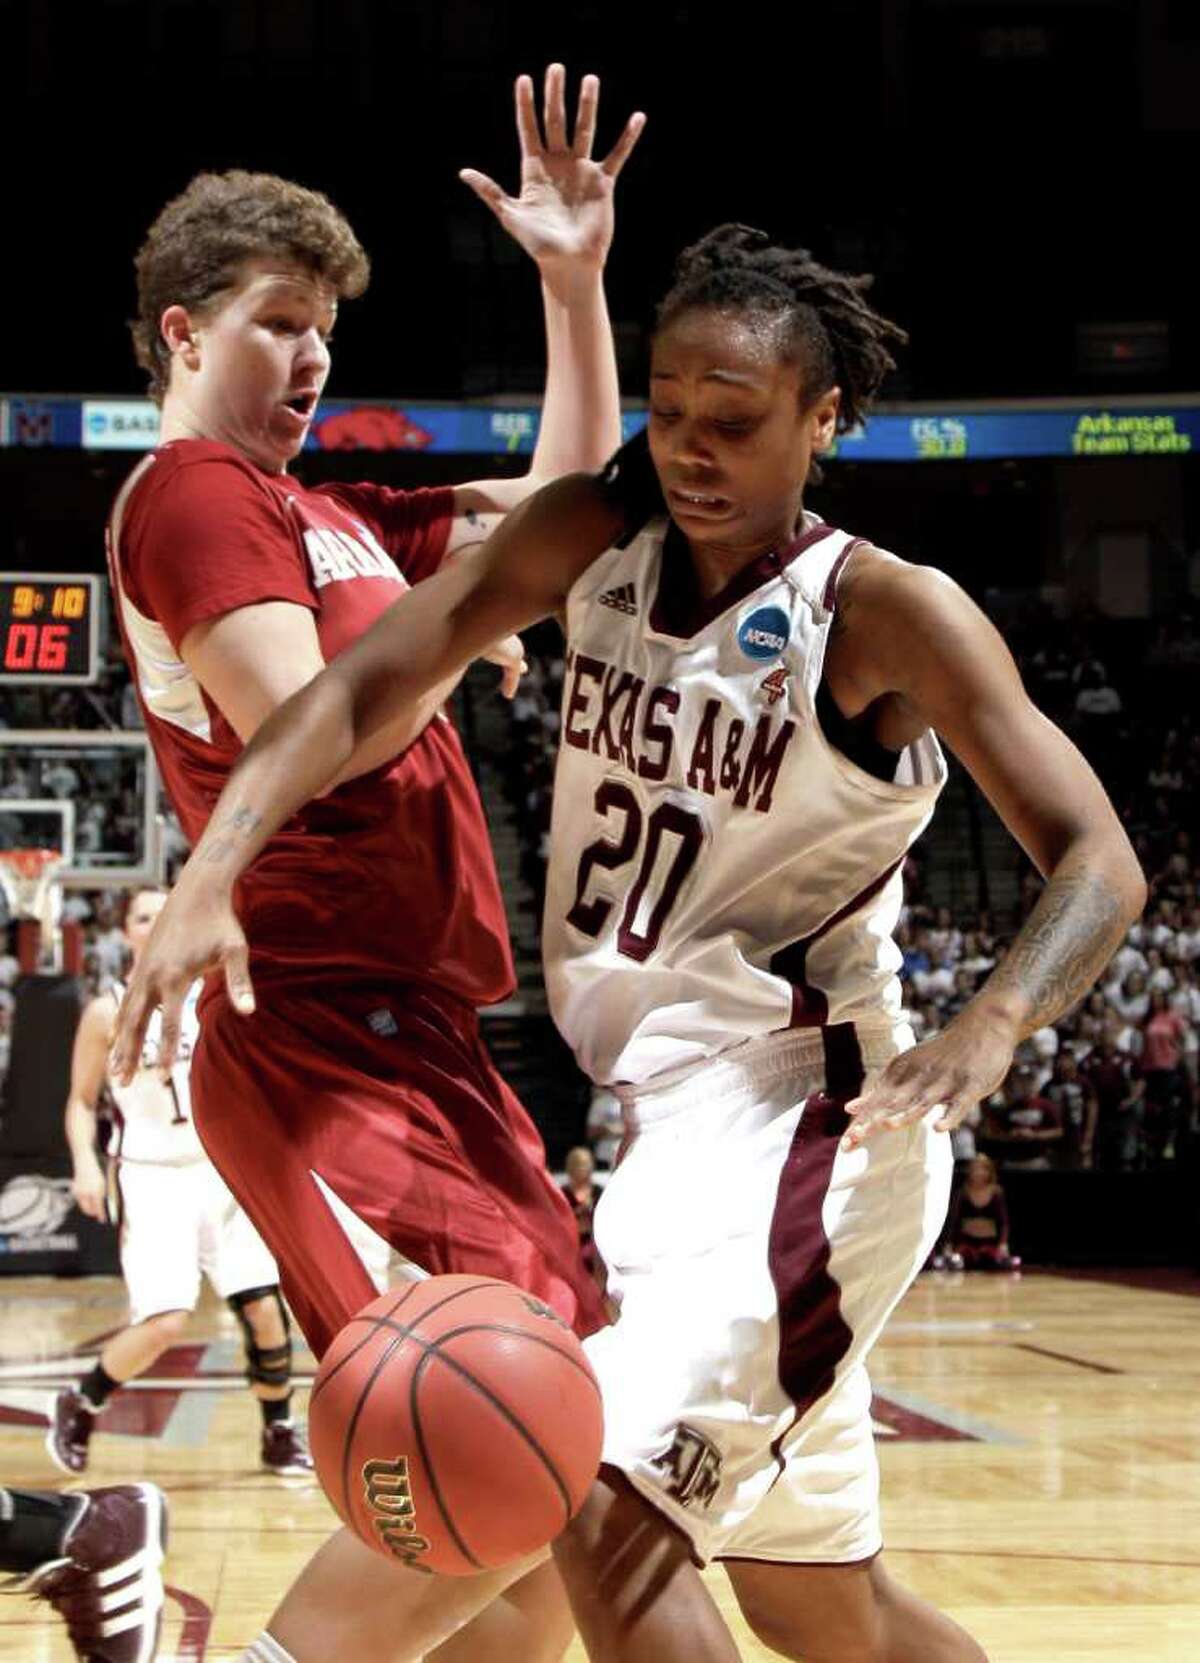 Arkansas' Sarah Watkins, left, knocks the ball loose from Texas A&M's Tyra White (20) during the first half of an NCAA tournament second-round women's college basketball game Monday, March 19, 2012, in College Station, Texas. (AP Photo/David J. Phillip